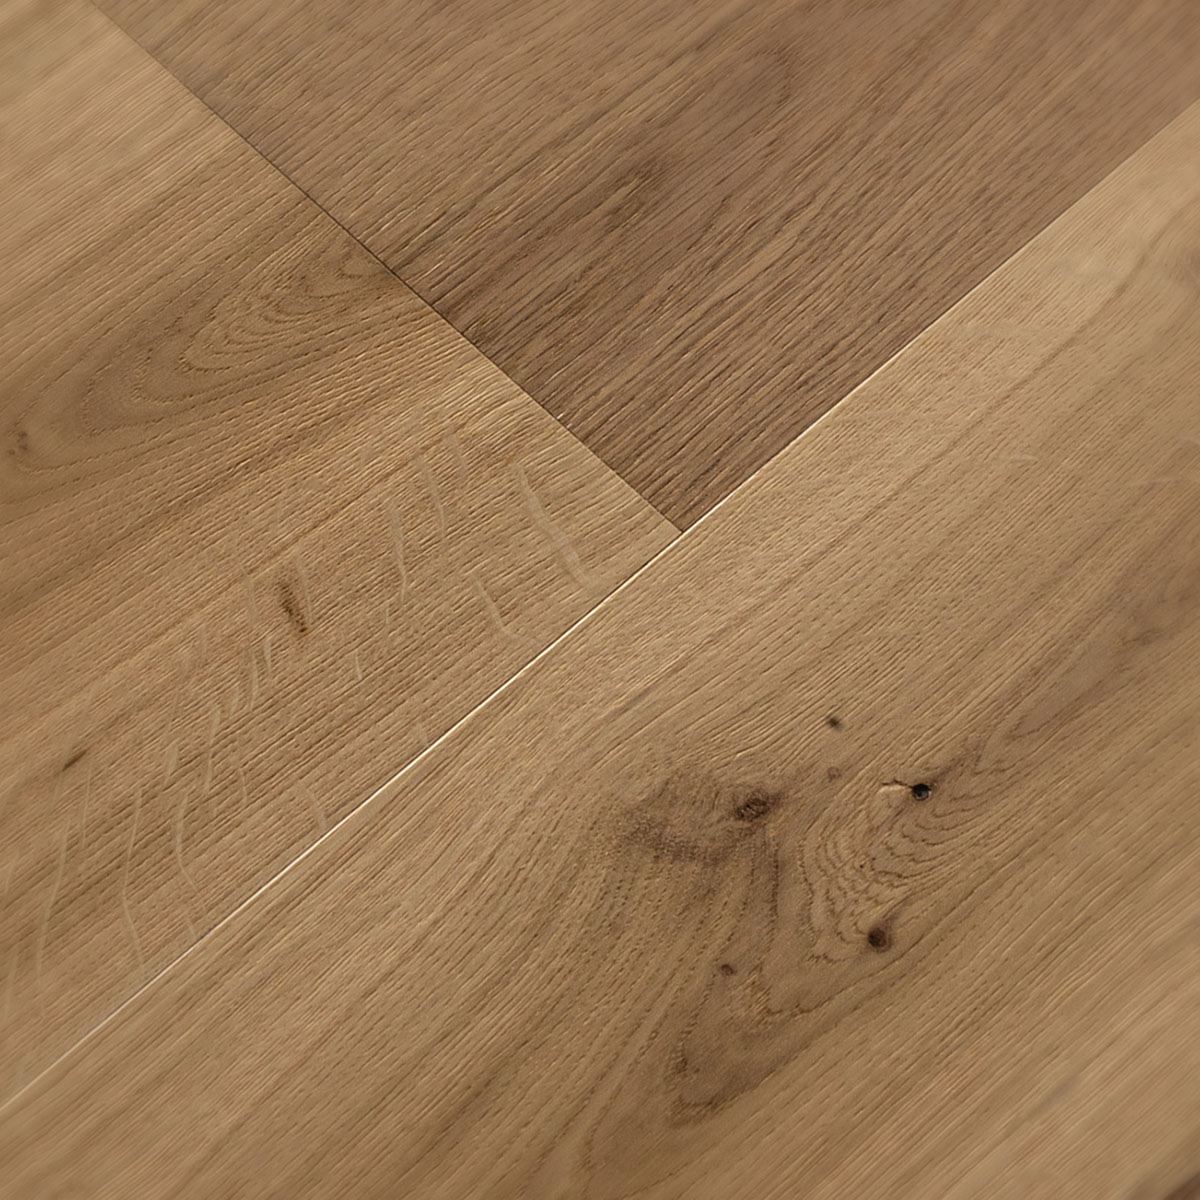 Natural-grade European oak floor with an unfinished look